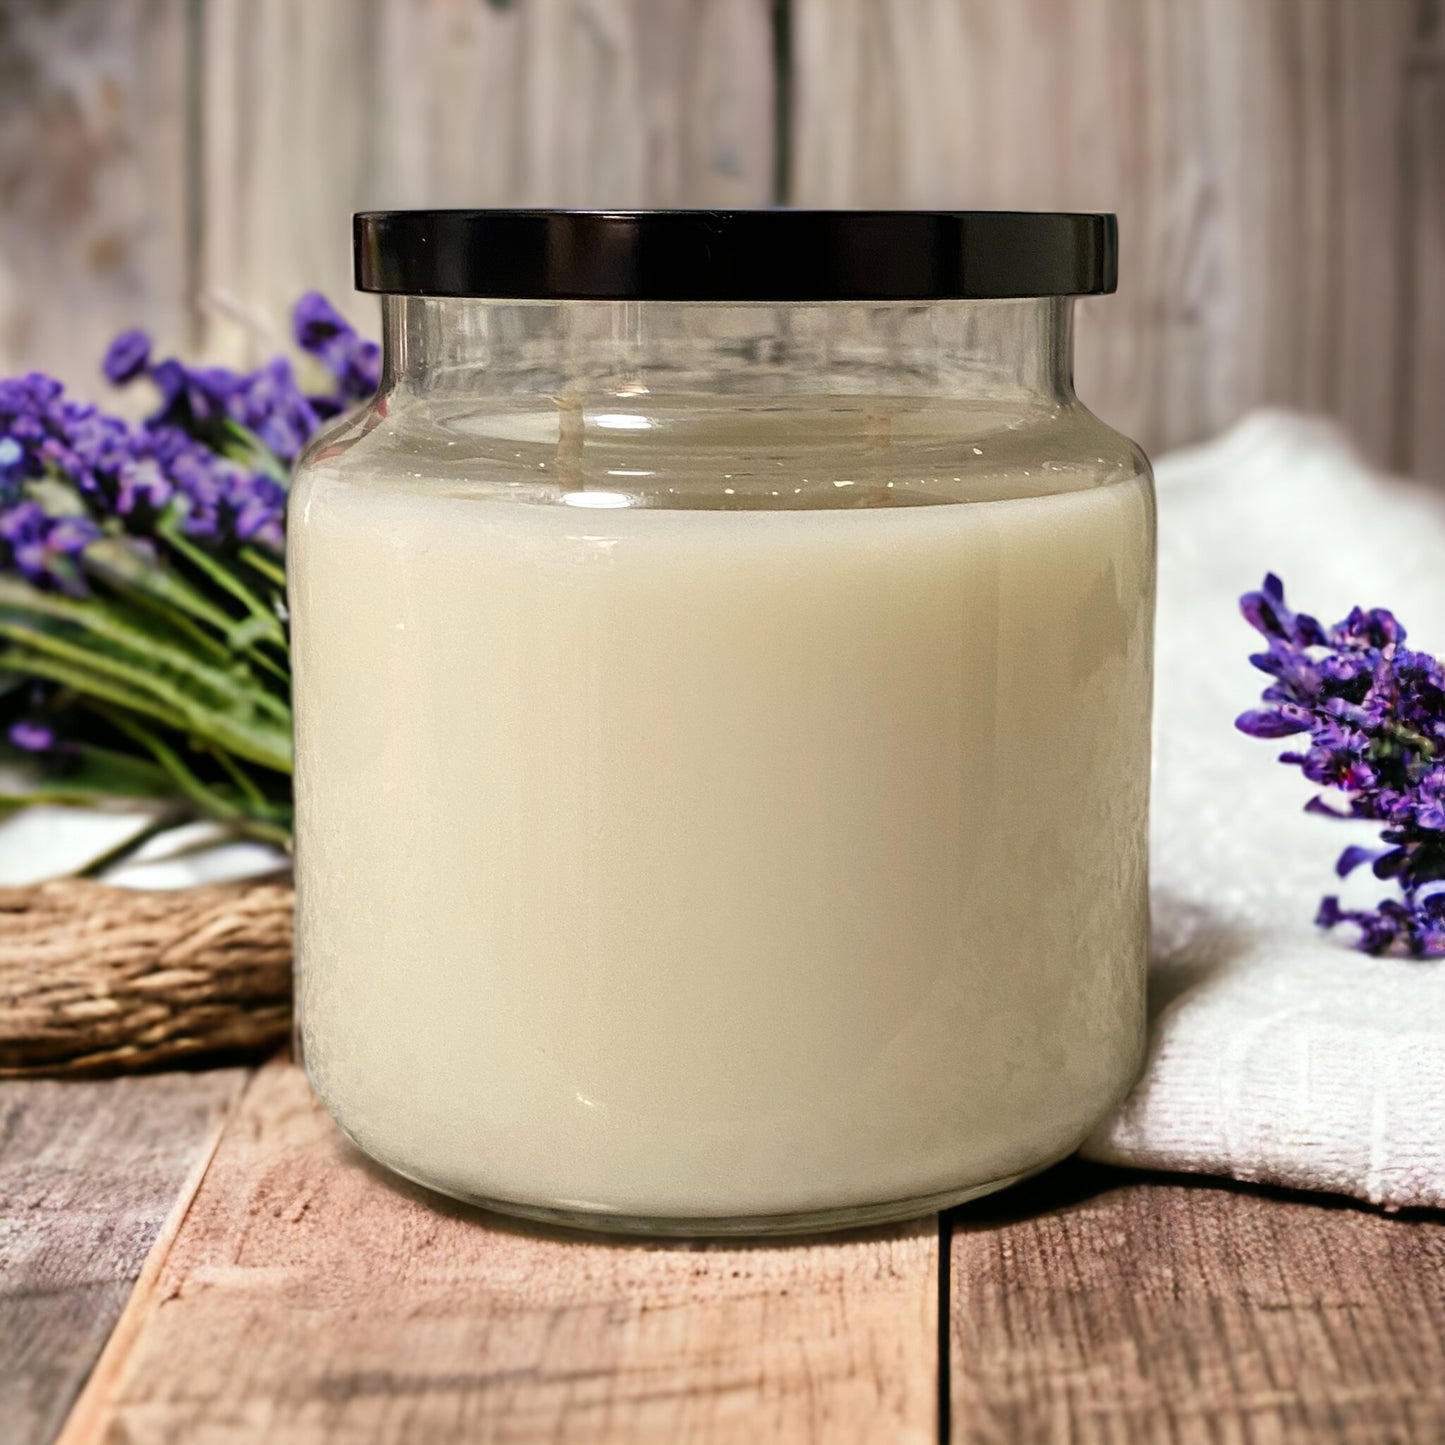 Onex Lavender Hand-Poured High Quality Soy Wax Candle